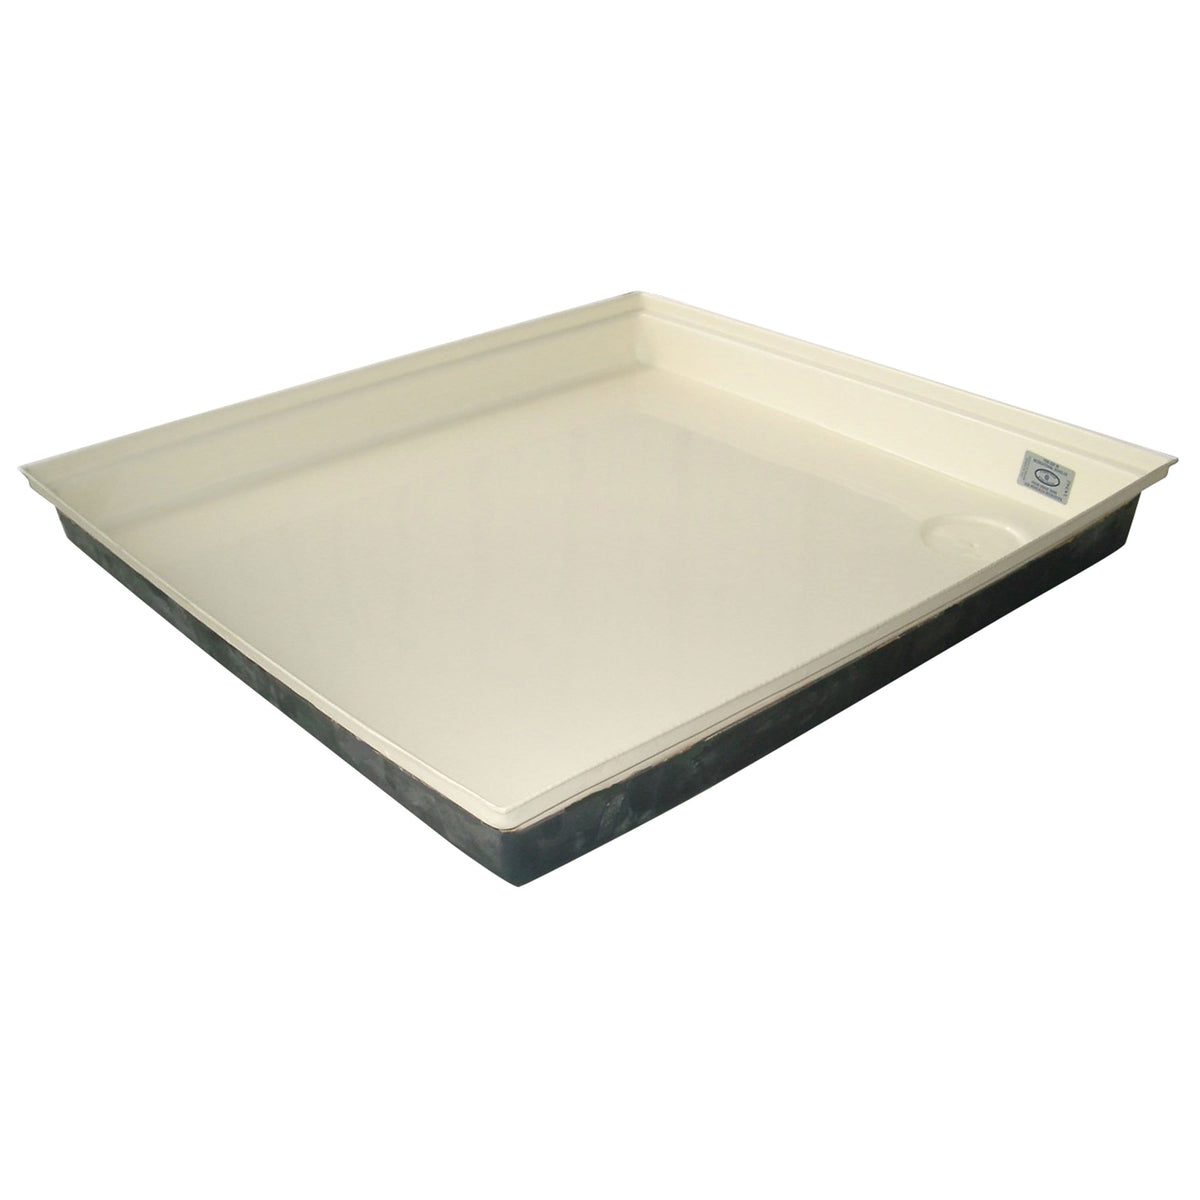 ICON Qualifies for Free Shipping ICON Shower Pan SP100 27" x 24" x 4" Colonial White #00460